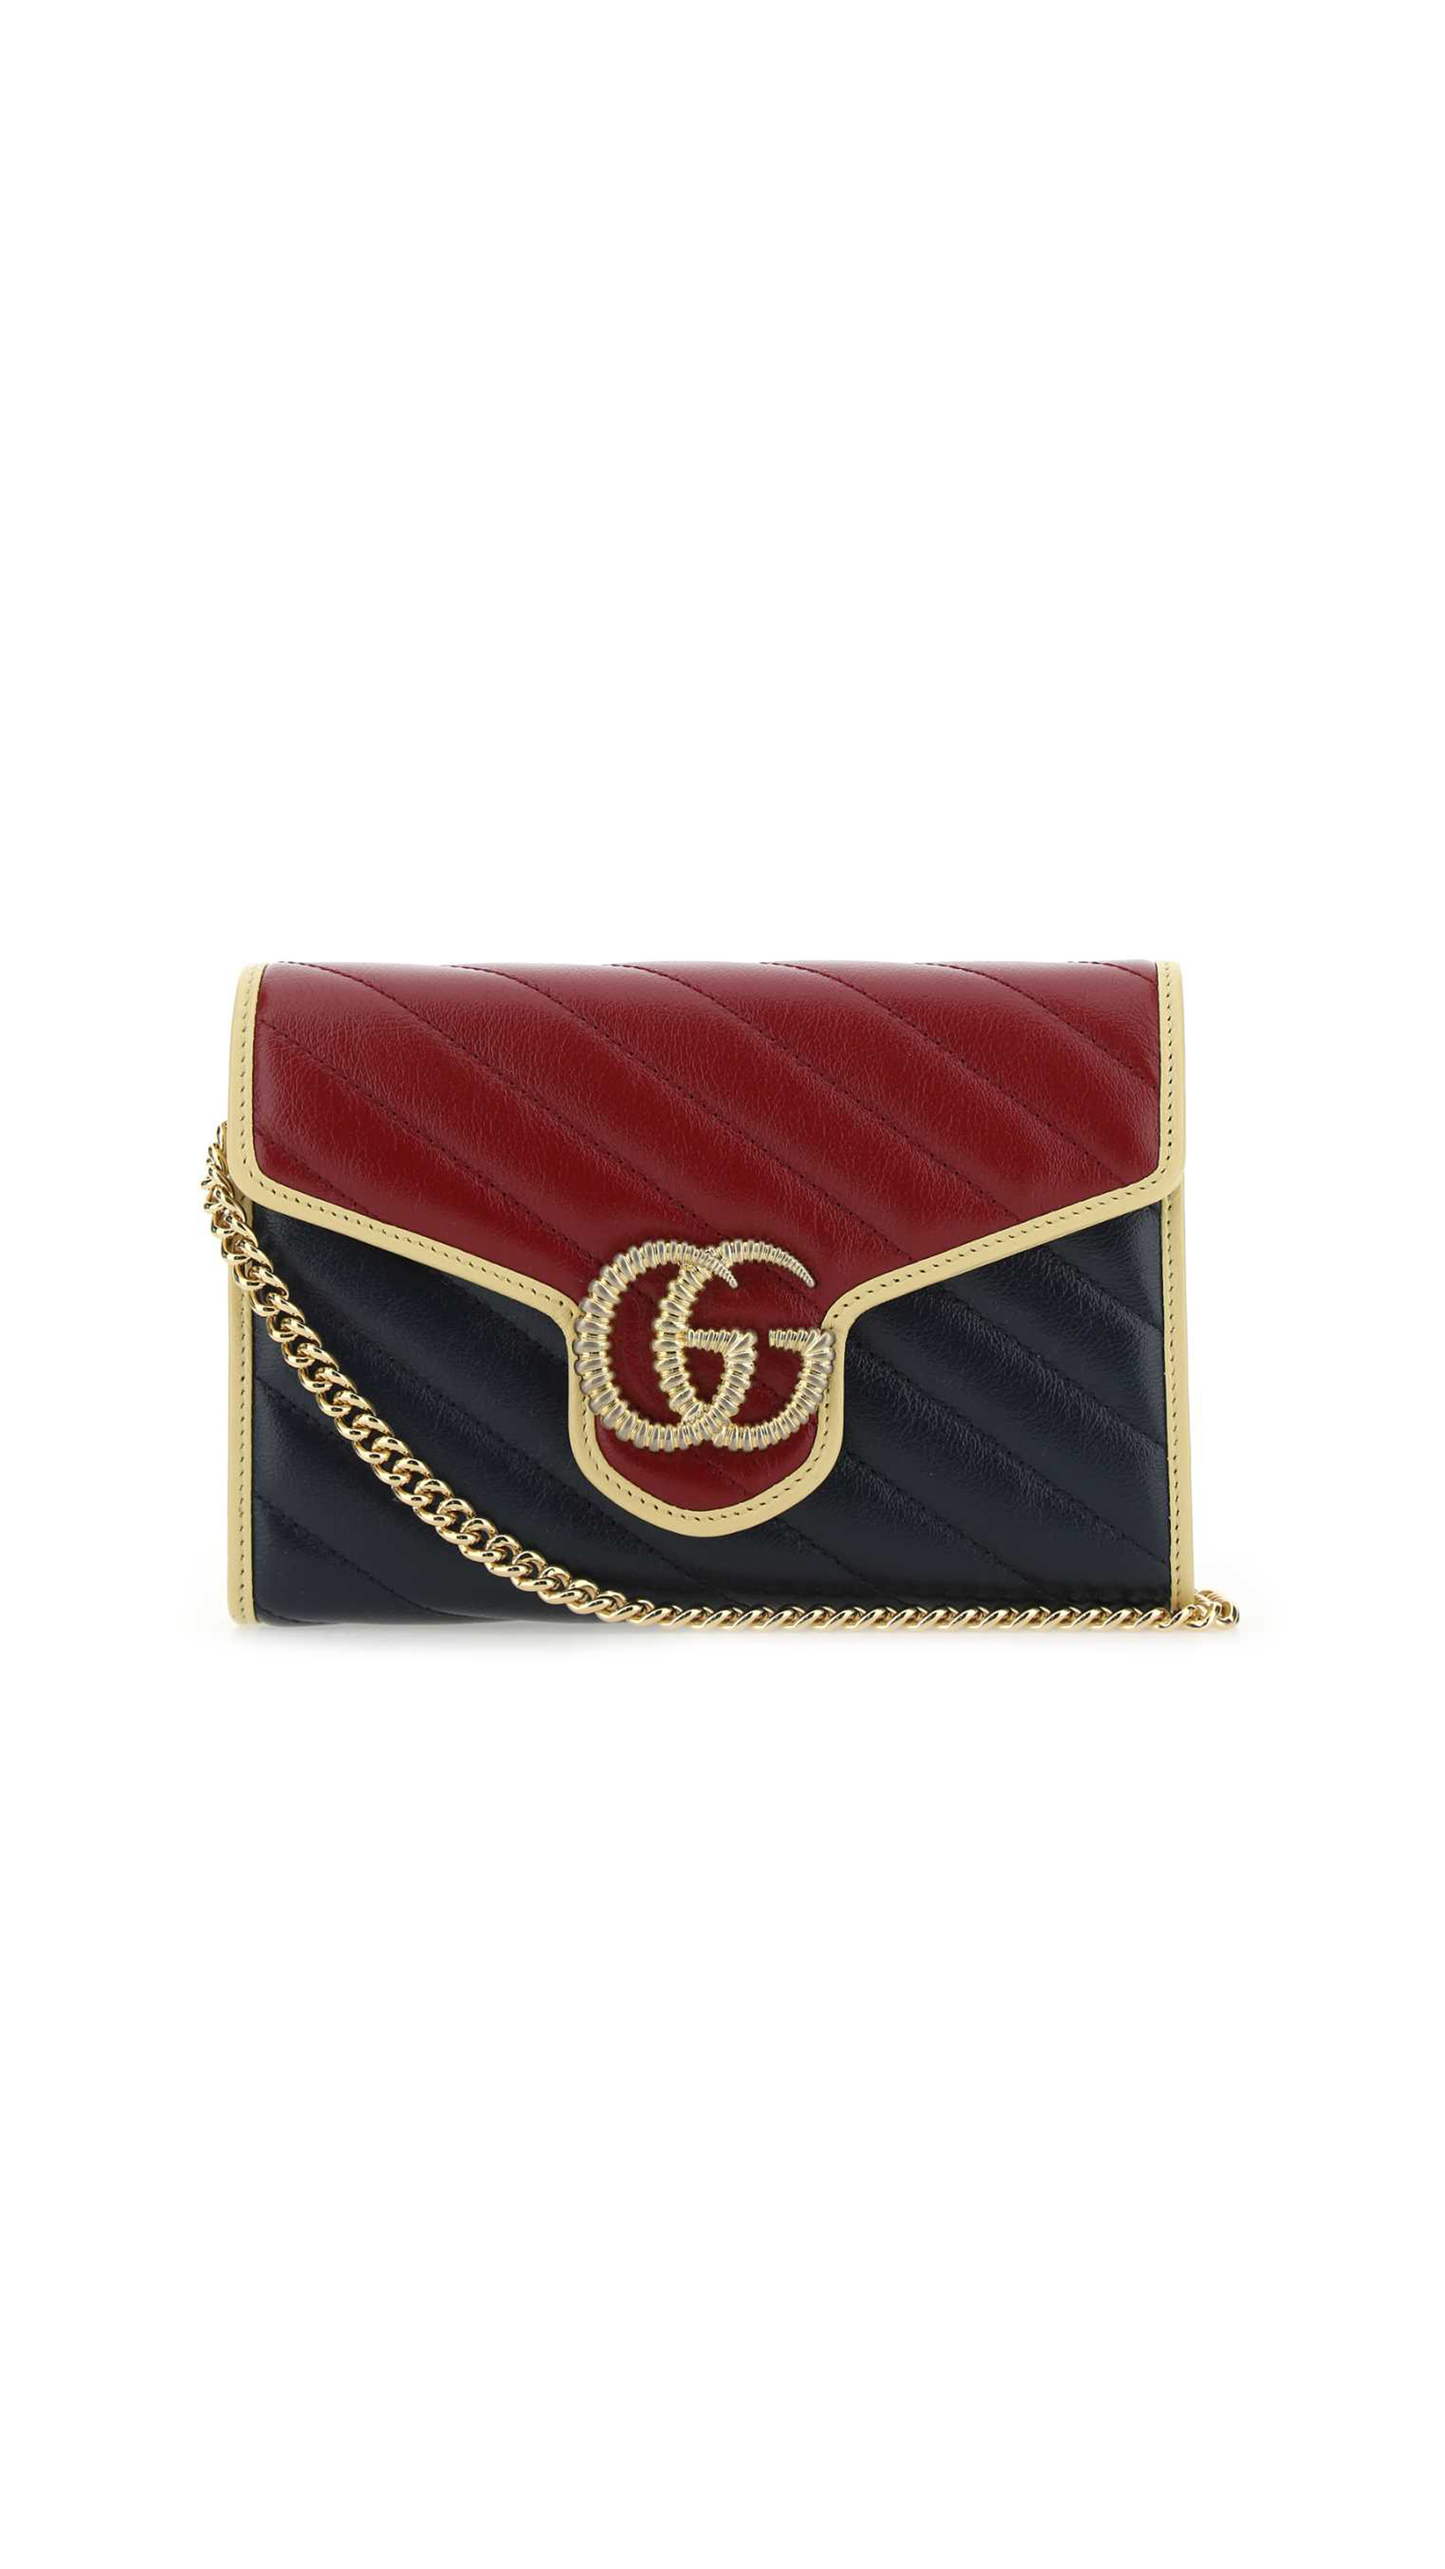 GG Marmont Matelassé Wallet On Chain - Black/Red/Gold